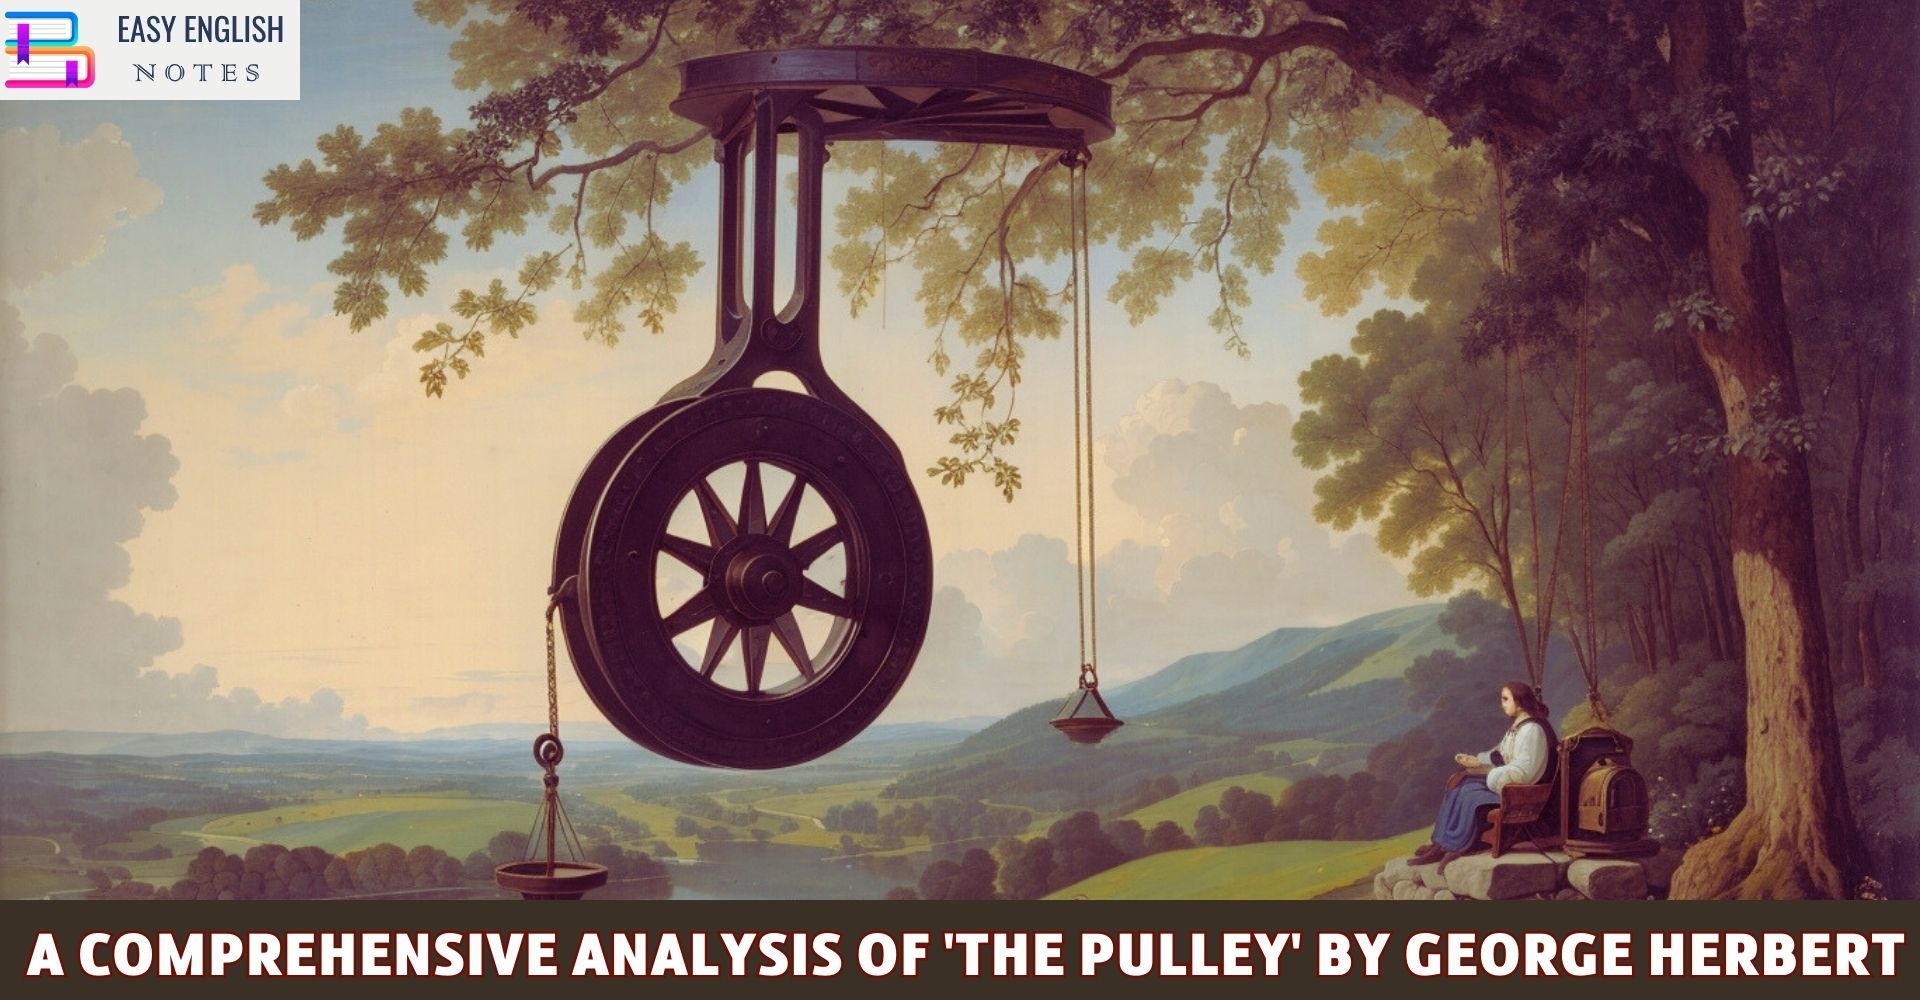 A Comprehensive Analysis of 'The Pulley' by George Herbert